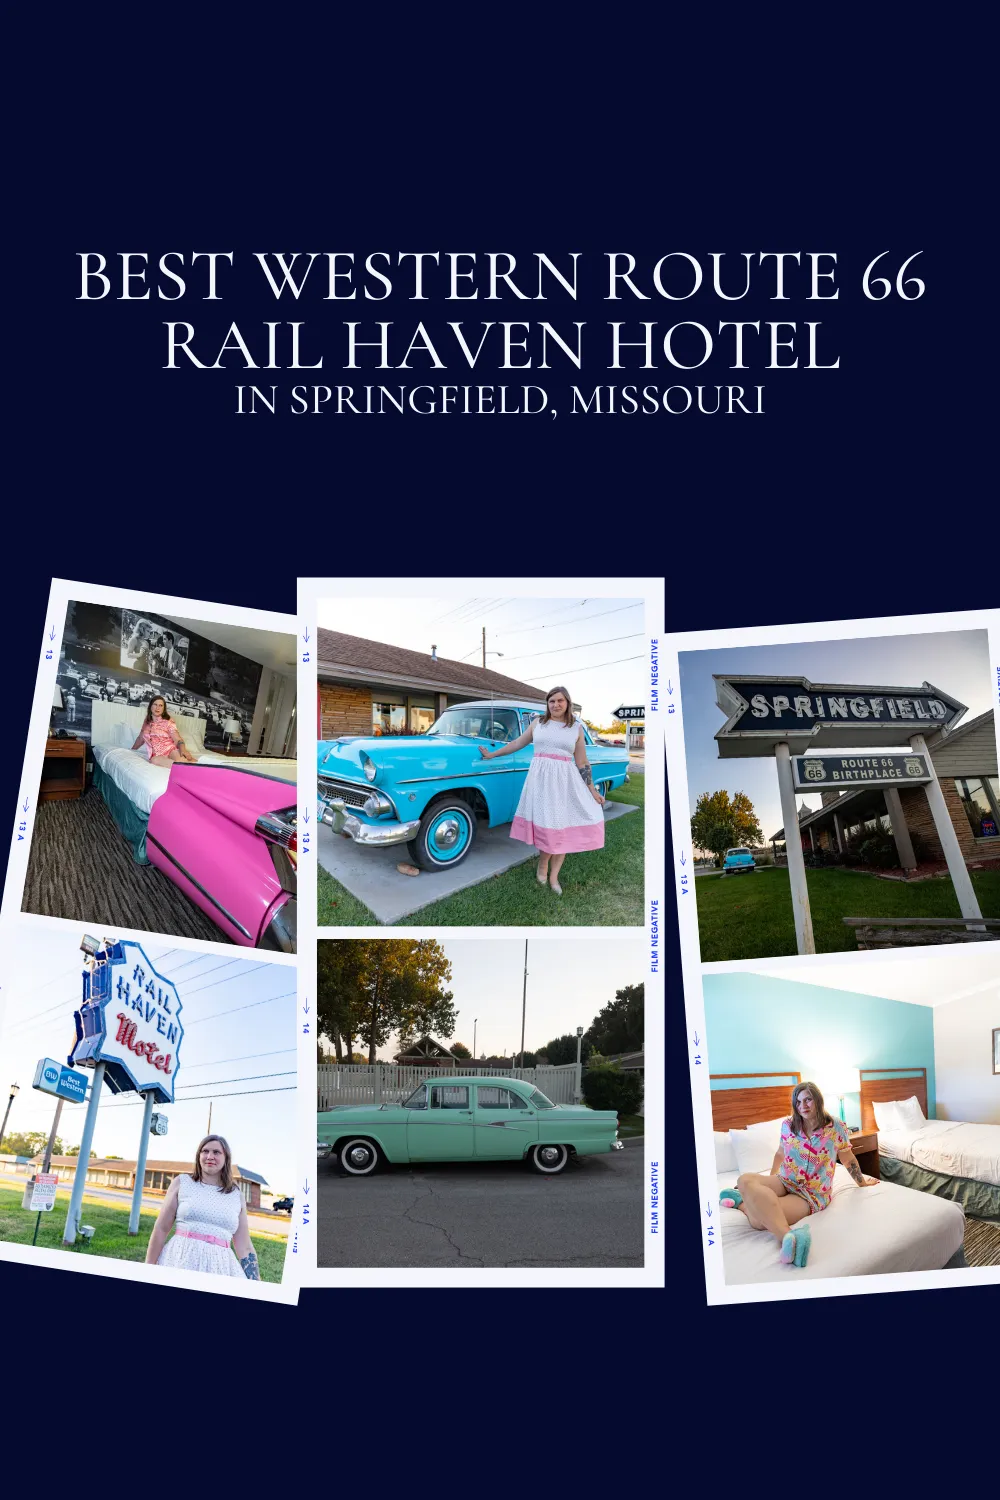 Route 66 travelers deserve a good night’s sleep. After a day behind the wheel on a Missouri road trip, stopping at all of the Route 66 roadside attractions, museums, restaurants, and more, a good shower and a comfy bed is always a welcome sight. Take that and add modern amenities, vintage charm, and a touch of Elvis, and you have this iconic Route 66 hotel. Welcome to the Best Western Route 66 Rail Haven hotel in Springfield, Missouri.  #RoadTrip #Route66 #Route66RoadTrip #MissouriRoute66